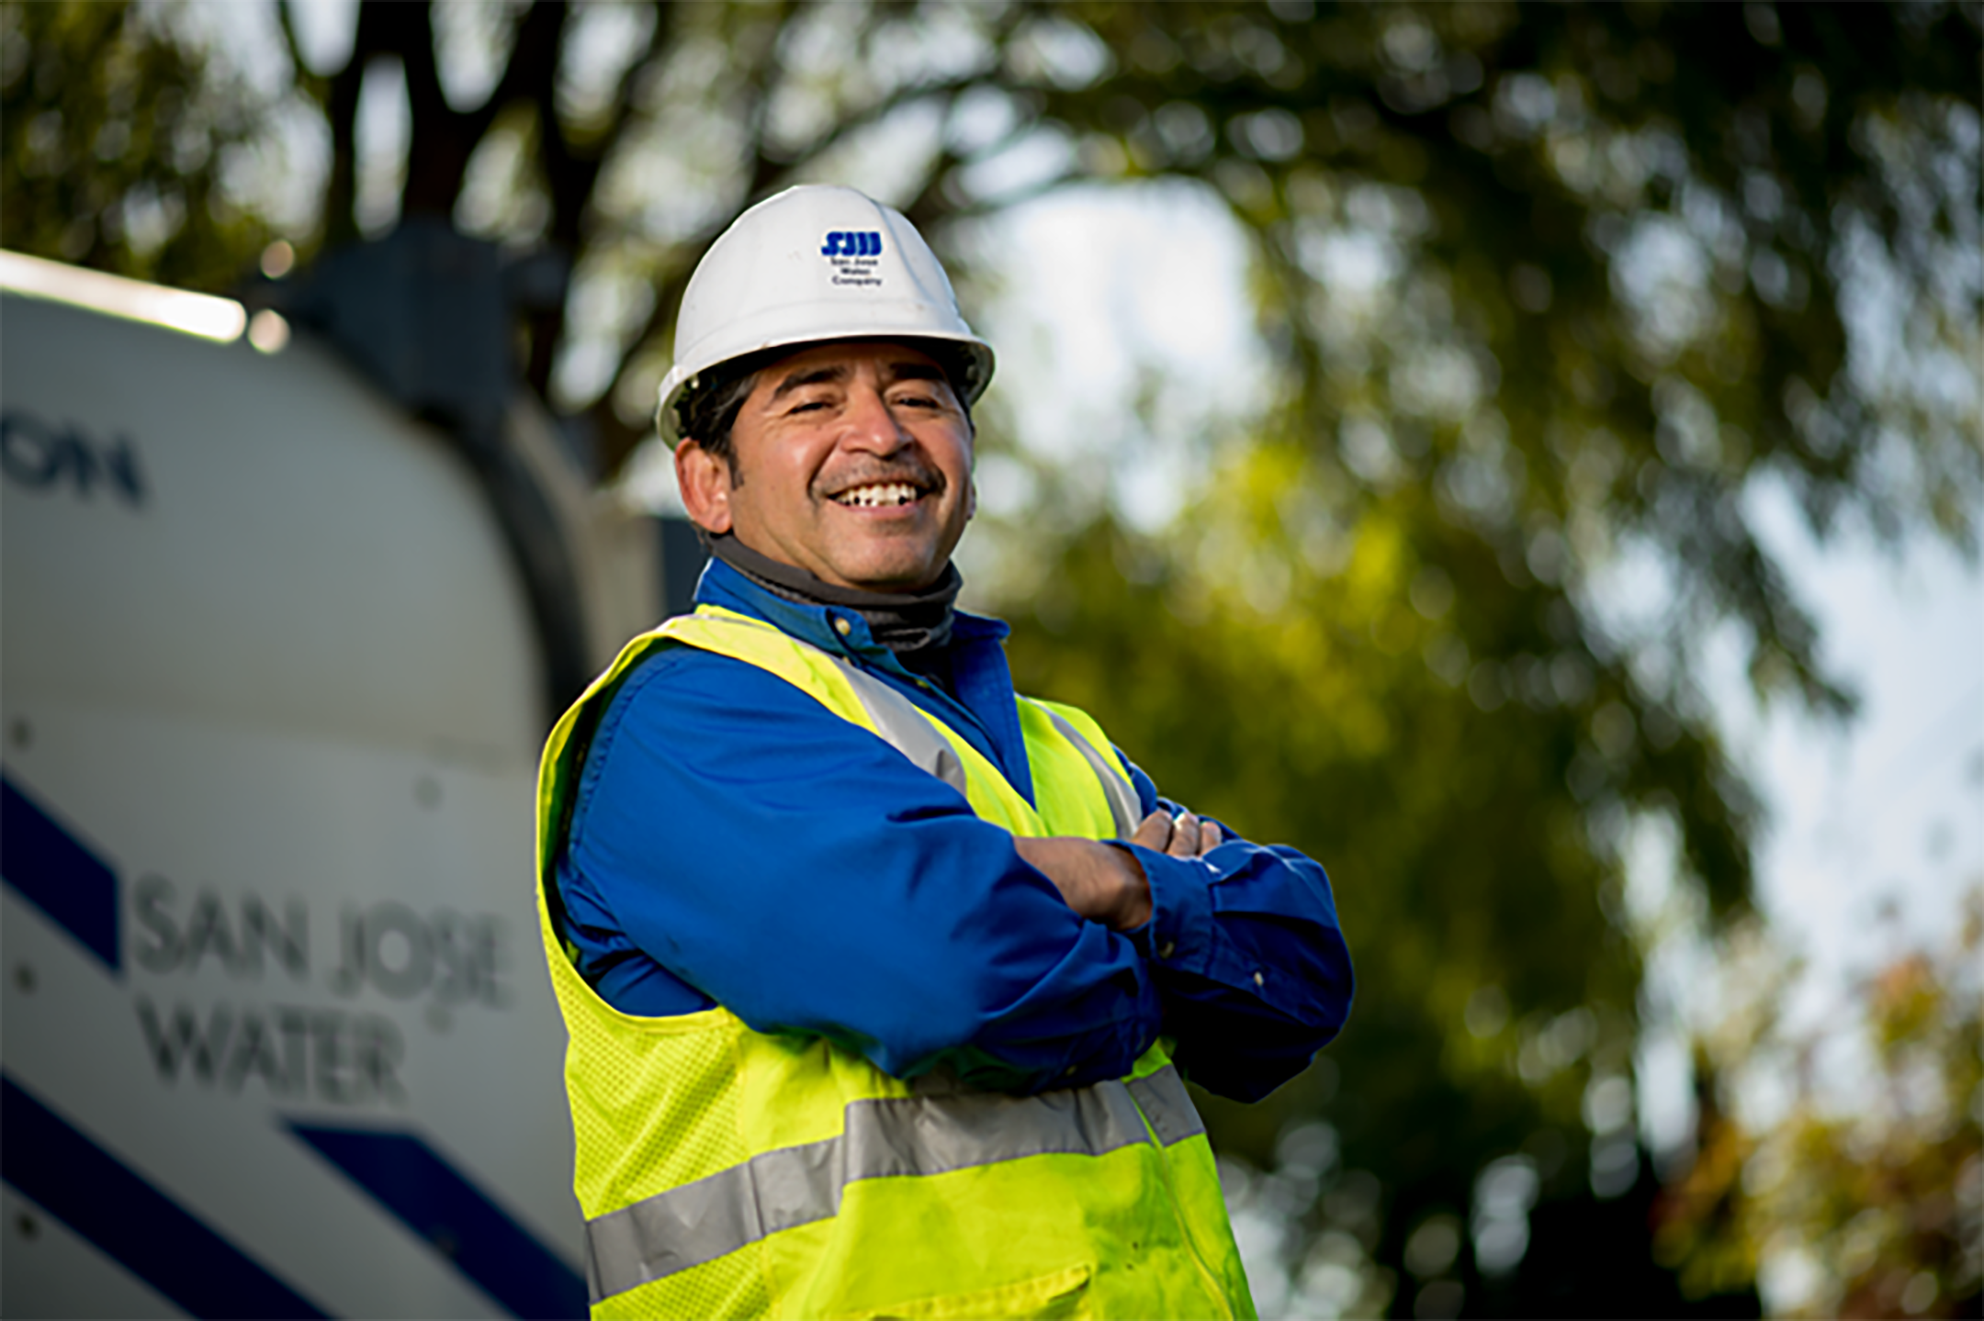 A male San Jose Water employee smiling with his arms cross in front of work truck.